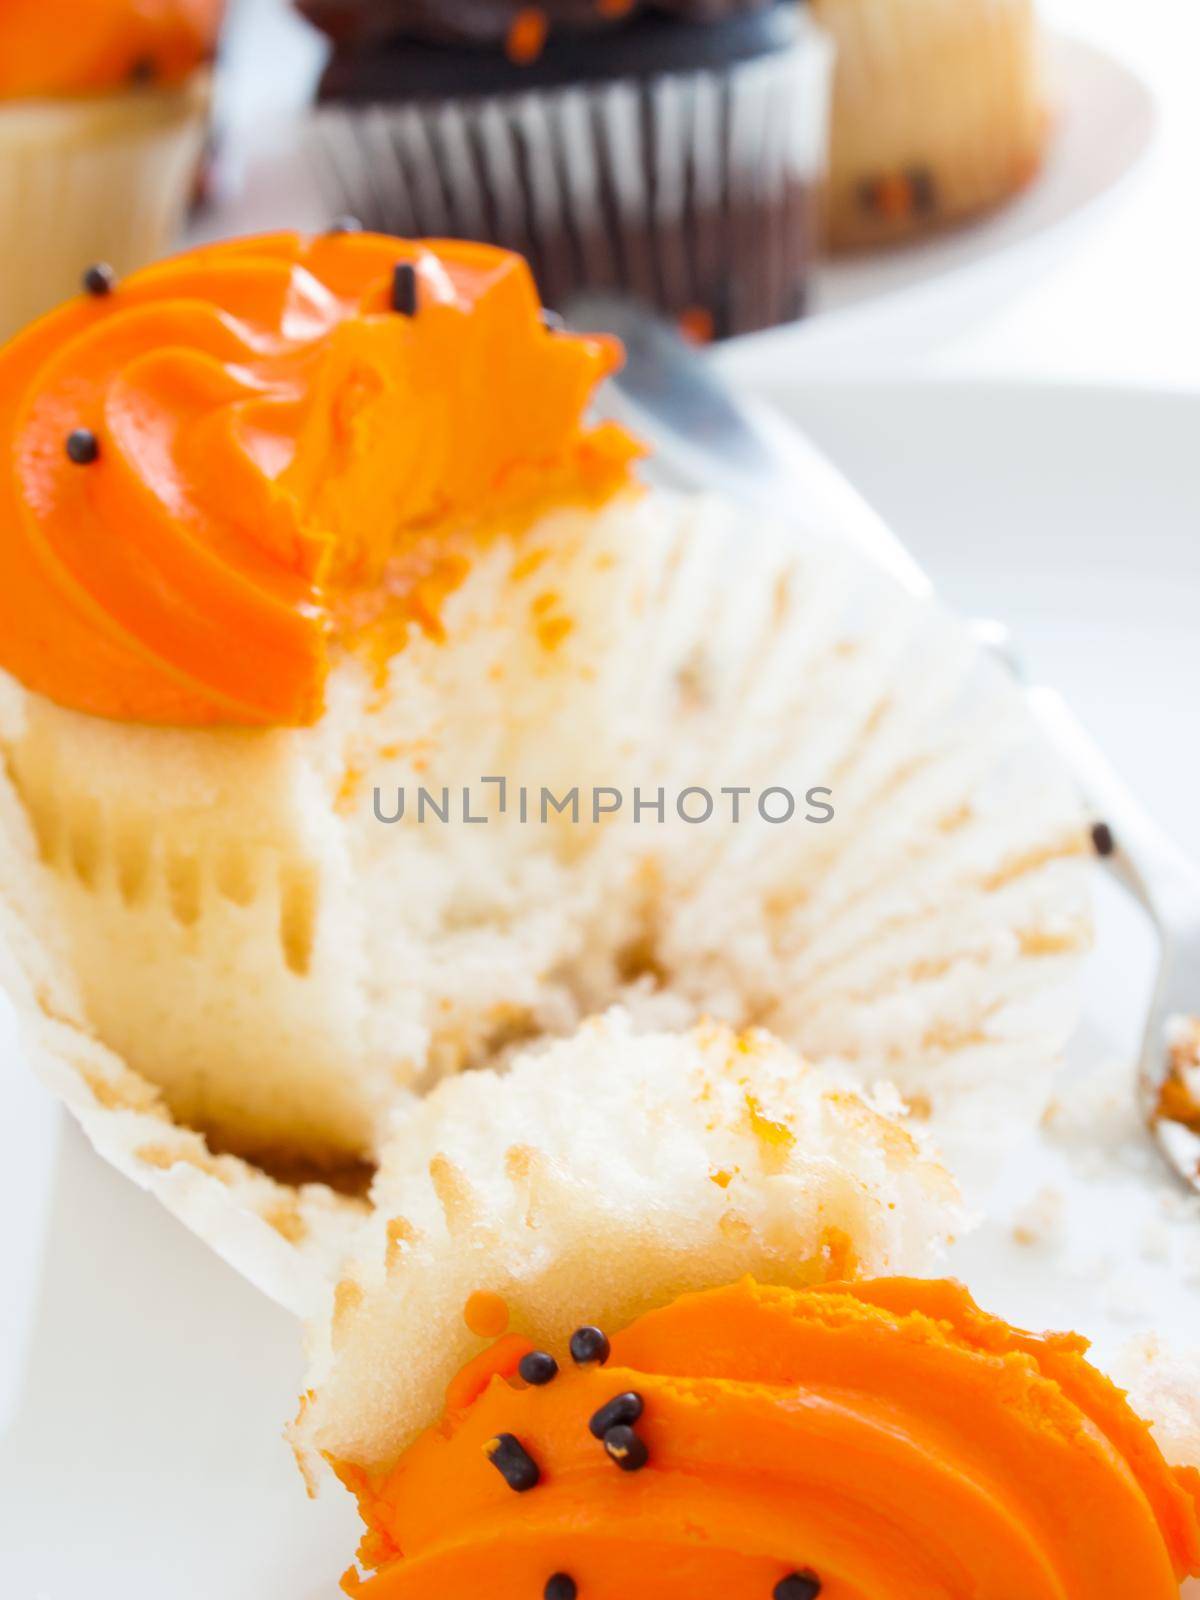 Eating Halloween cupcakes with orange and black icing.